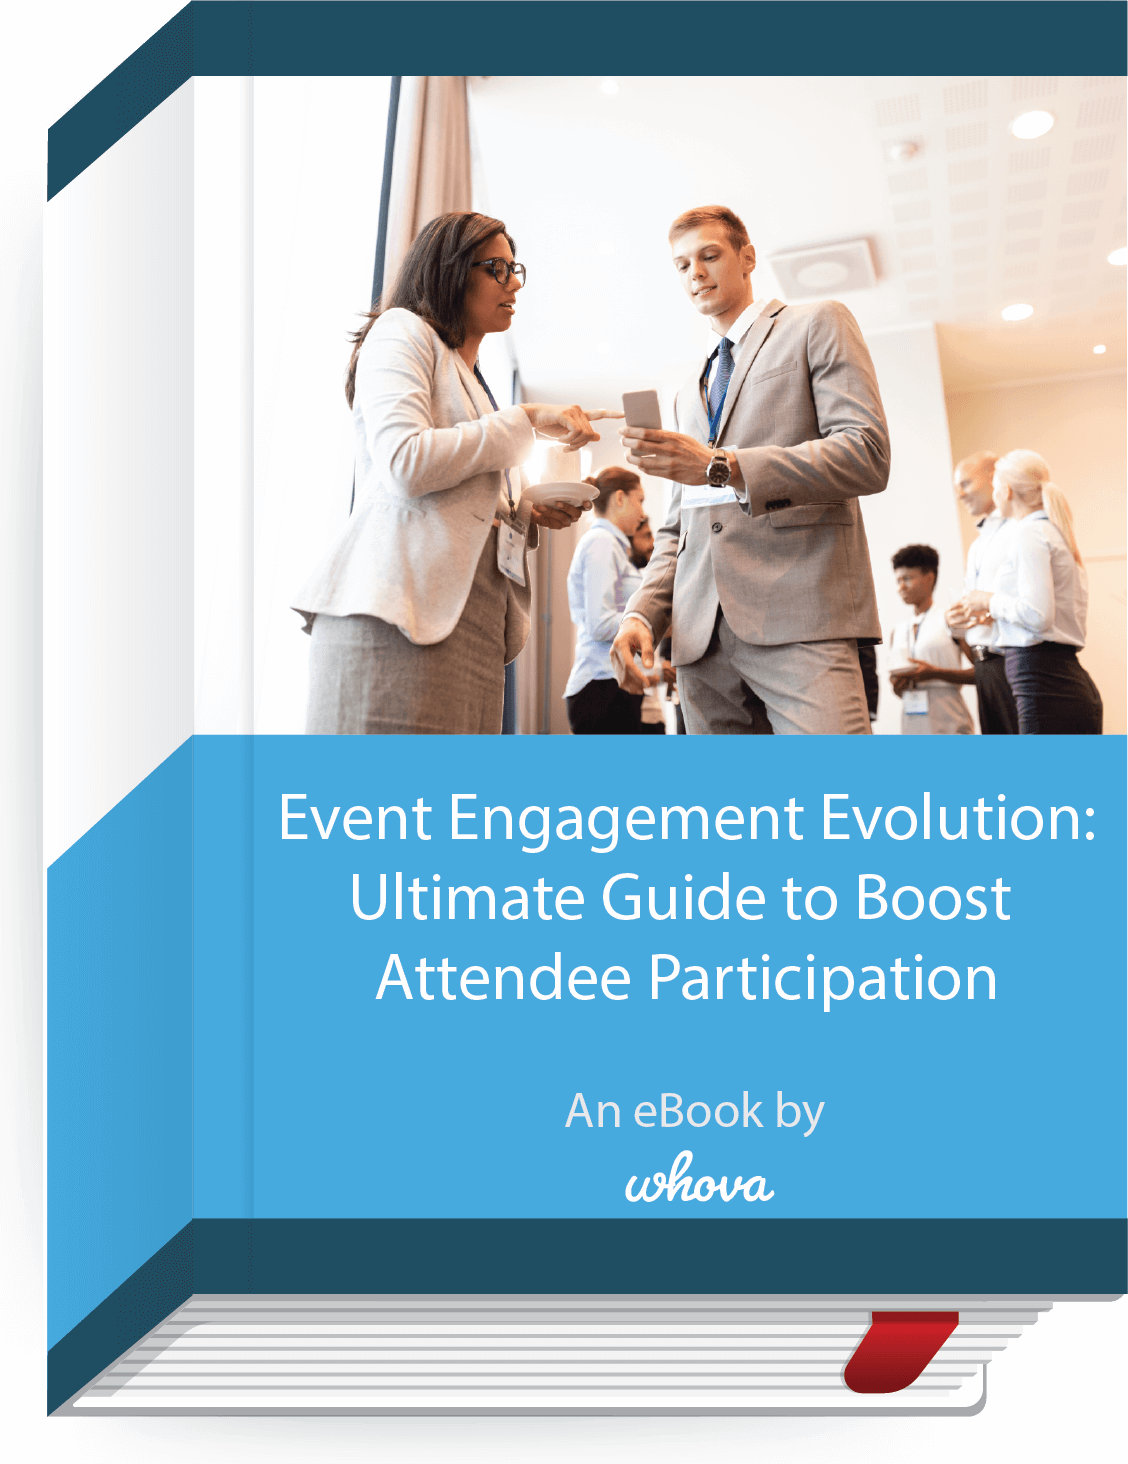 whova-ebook-event-engagement-attendee-participation